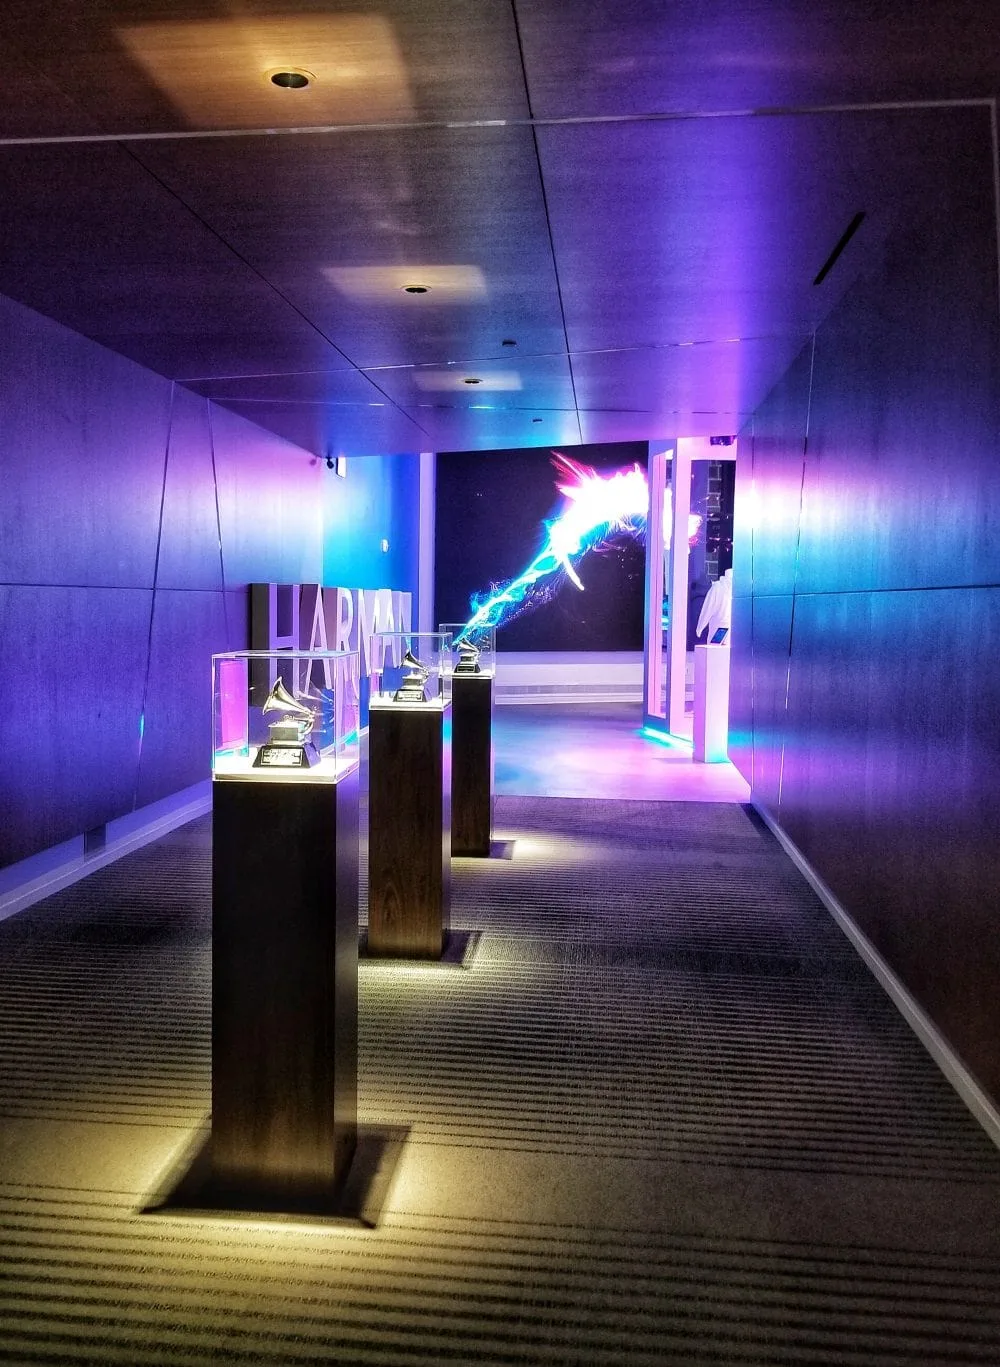 Grammy awards in the hallway at the Harman Experience Center. 